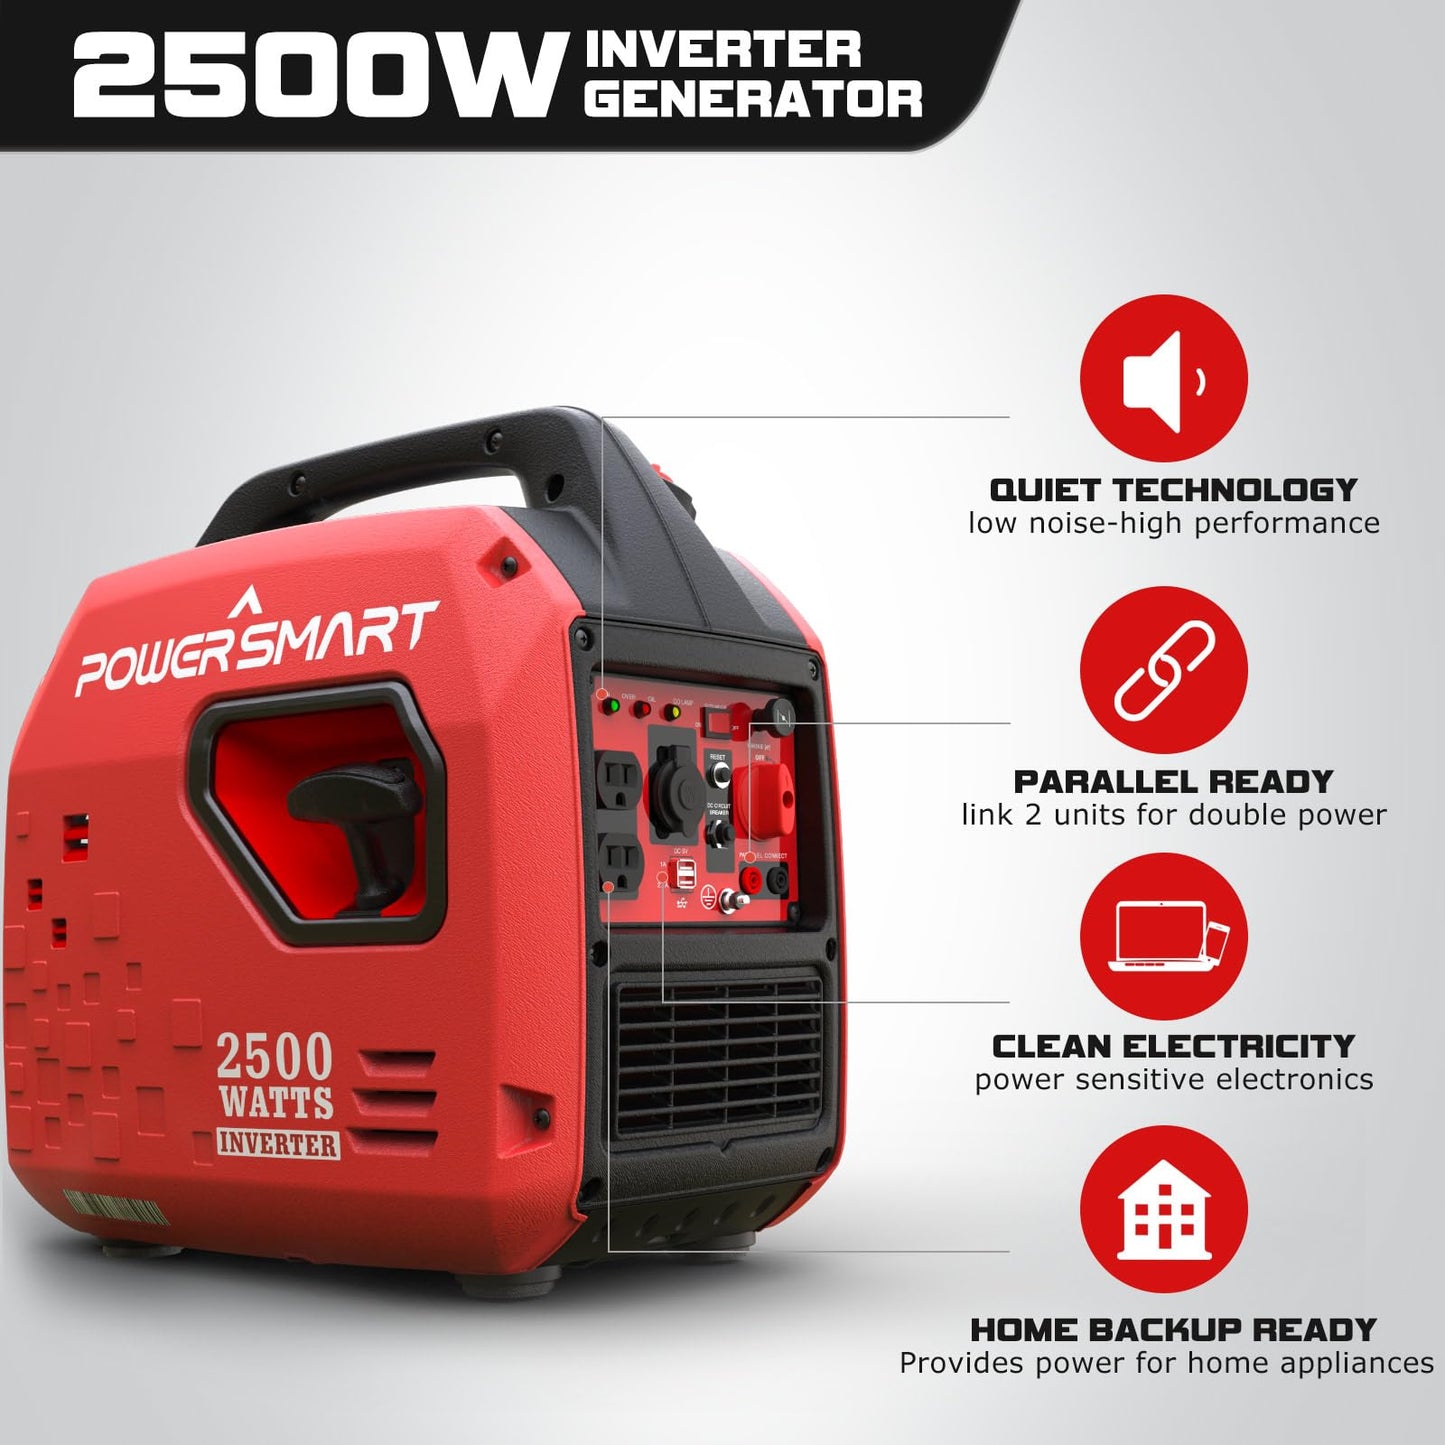 PowerSmart 2500-Watt Portable Inverter Generator, Super Quiet Gas Powered Generator for Camping, Home Use, Outdoor, CARB Compliant 2500 Watts/Red